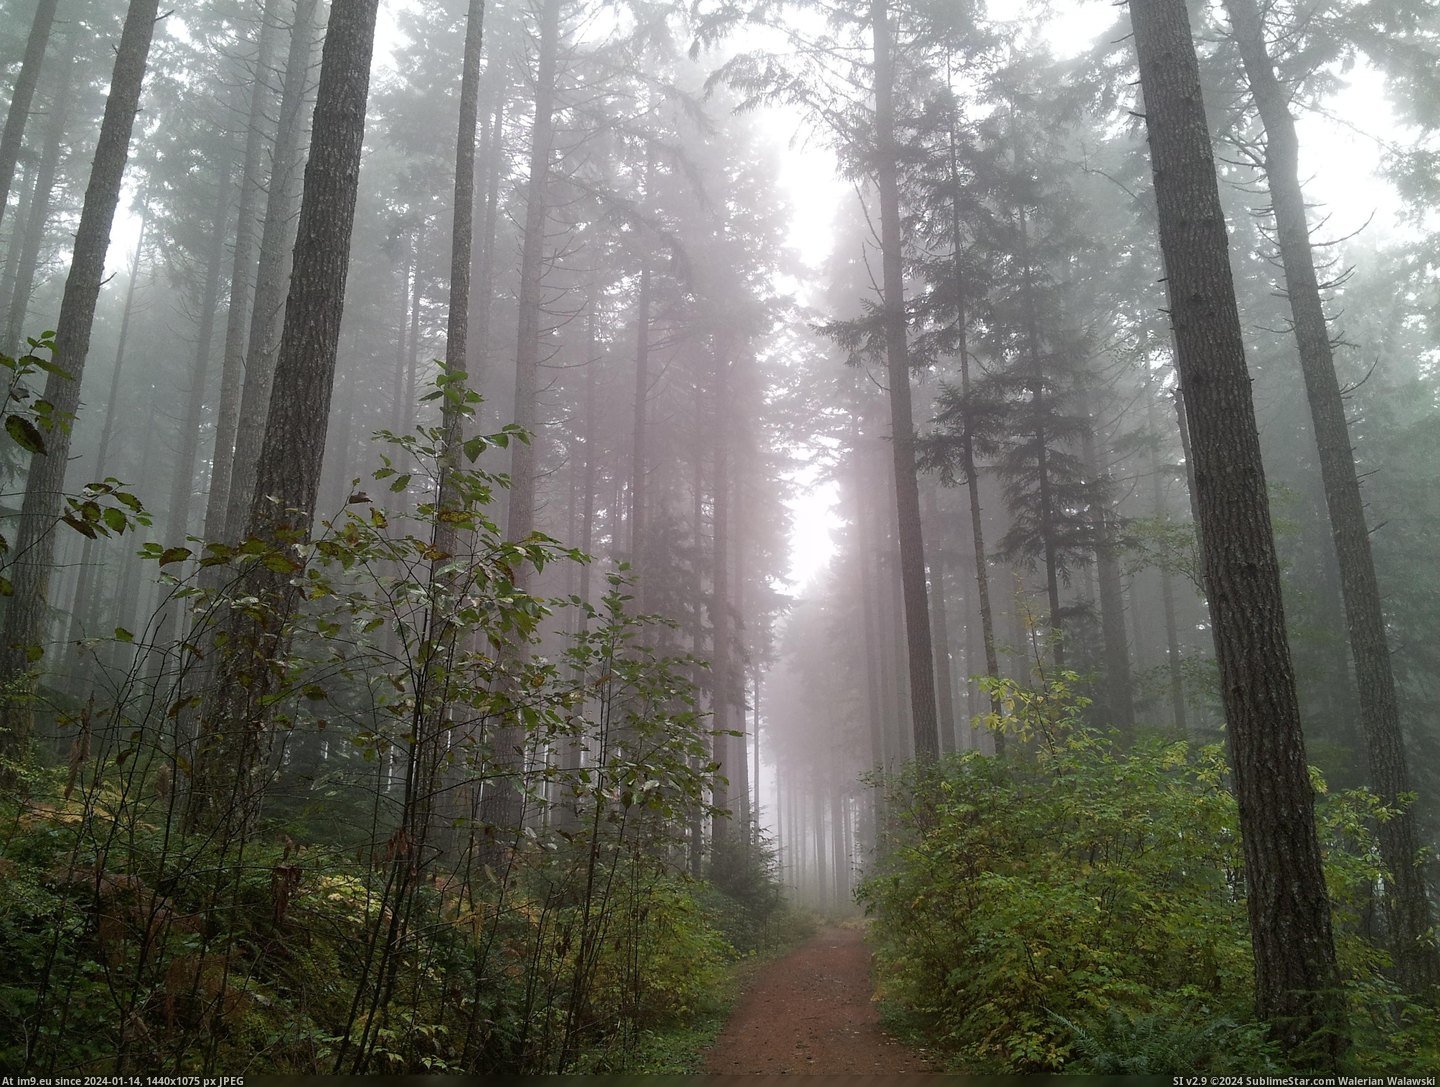 #Photo #Day #Wallpaper #Trees #Fog #Foggy #Nanaimo #Forest #Road #3264x2448 [Earthporn] A foggy day along a forest road, Nanaimo, BC. [OC] [3264x2448] Pic. (Изображение из альбом My r/EARTHPORN favs))